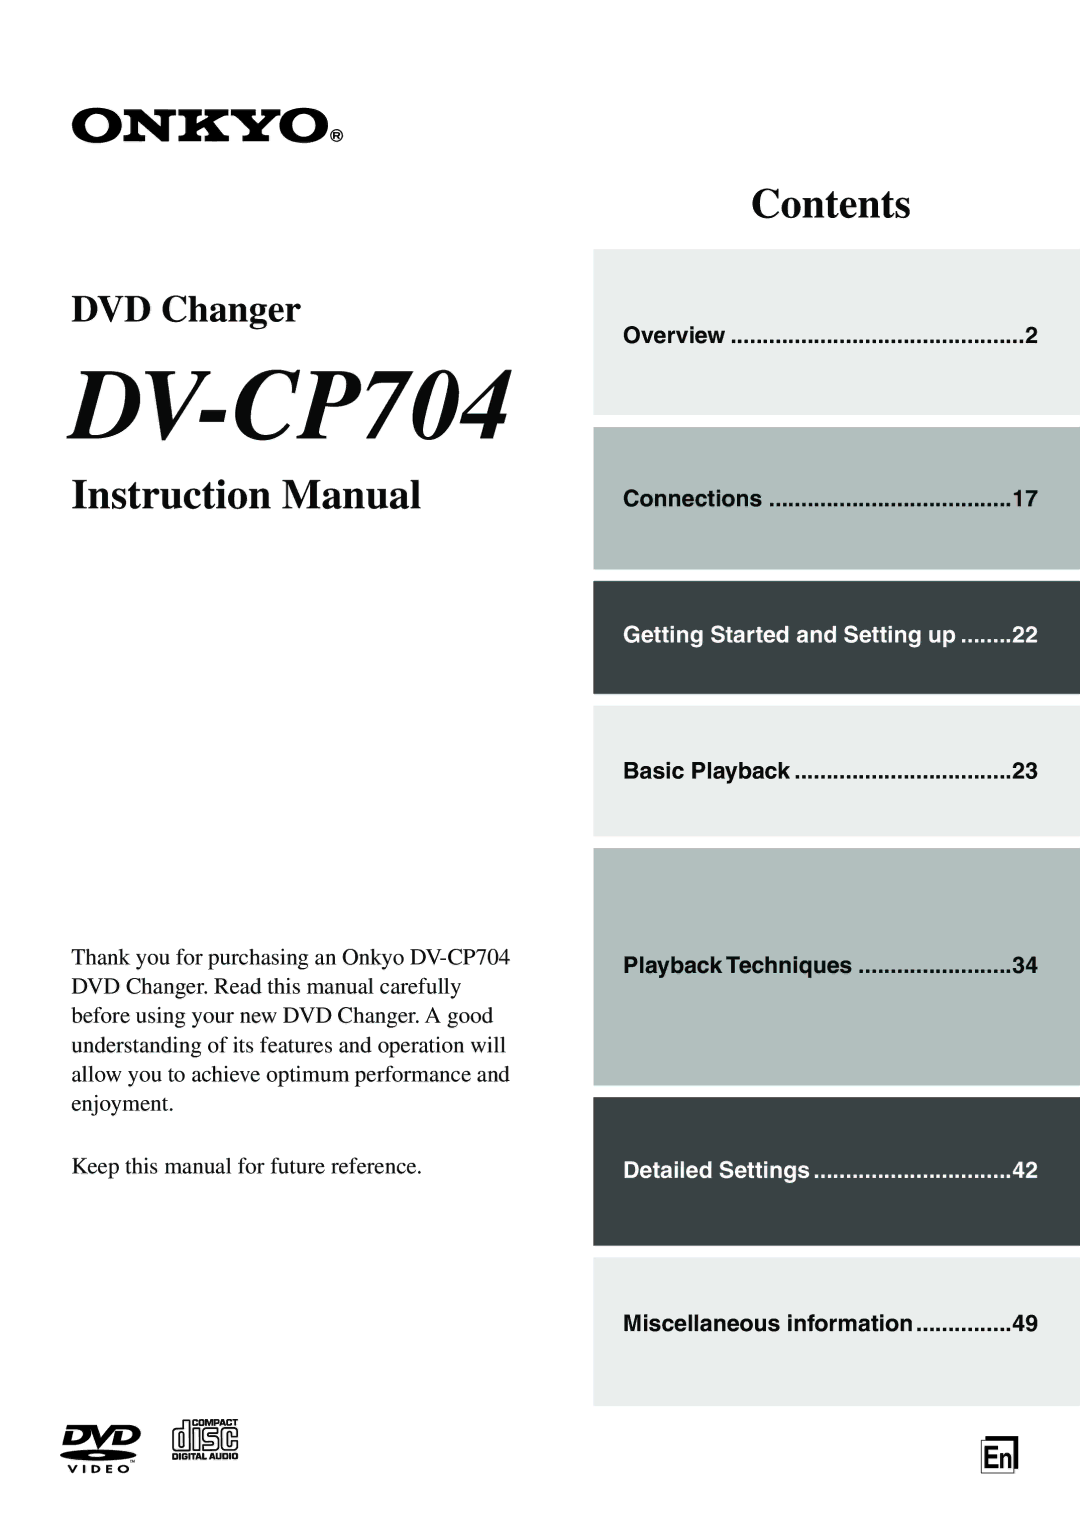 Onkyo DV-CP704S instruction manual Connections, Basic Playback 